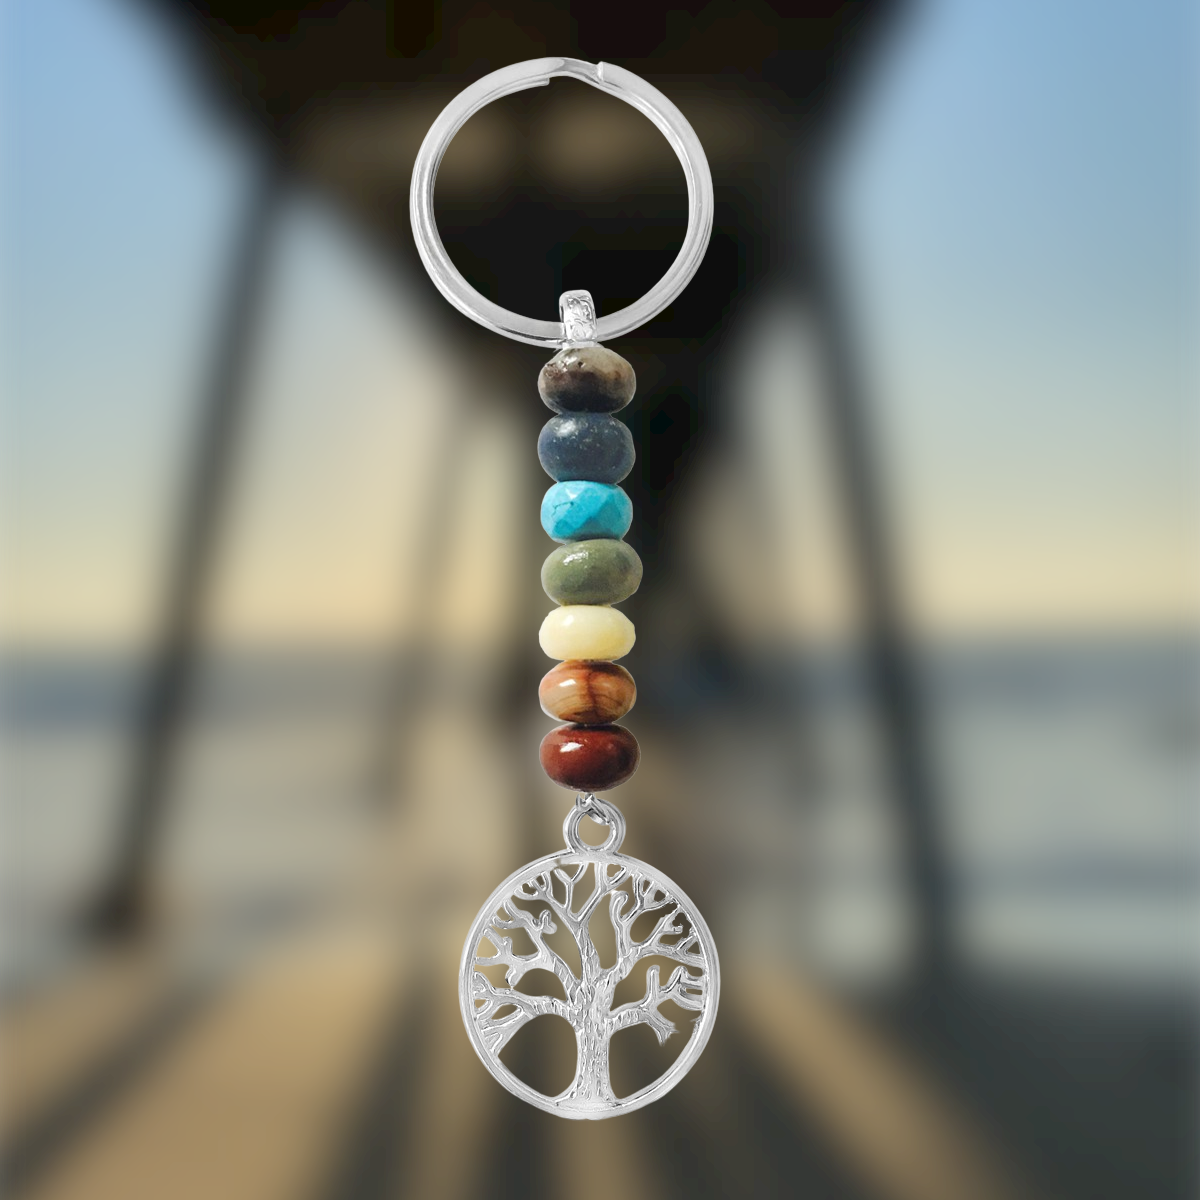 7 Chakra Keychain with Colorful Crystals and the Tree of Life for Spiritual Development